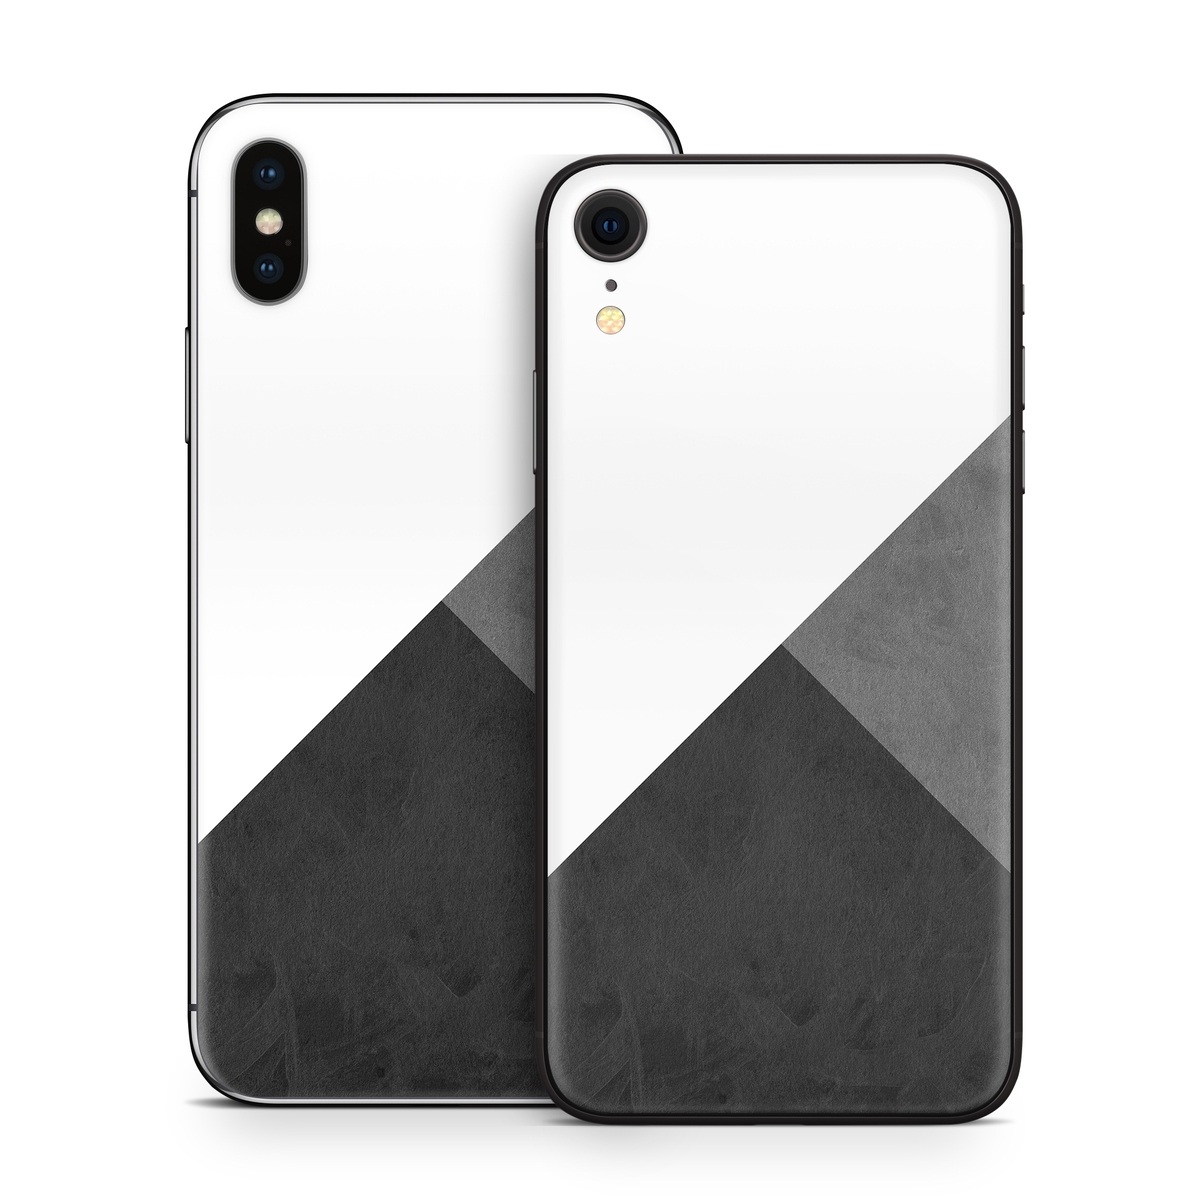 iPhone XS Skin design of Black, White, Black-and-white, Line, Grey, Architecture, Monochrome, Triangle, Monochrome photography, Pattern with white, black, gray colors